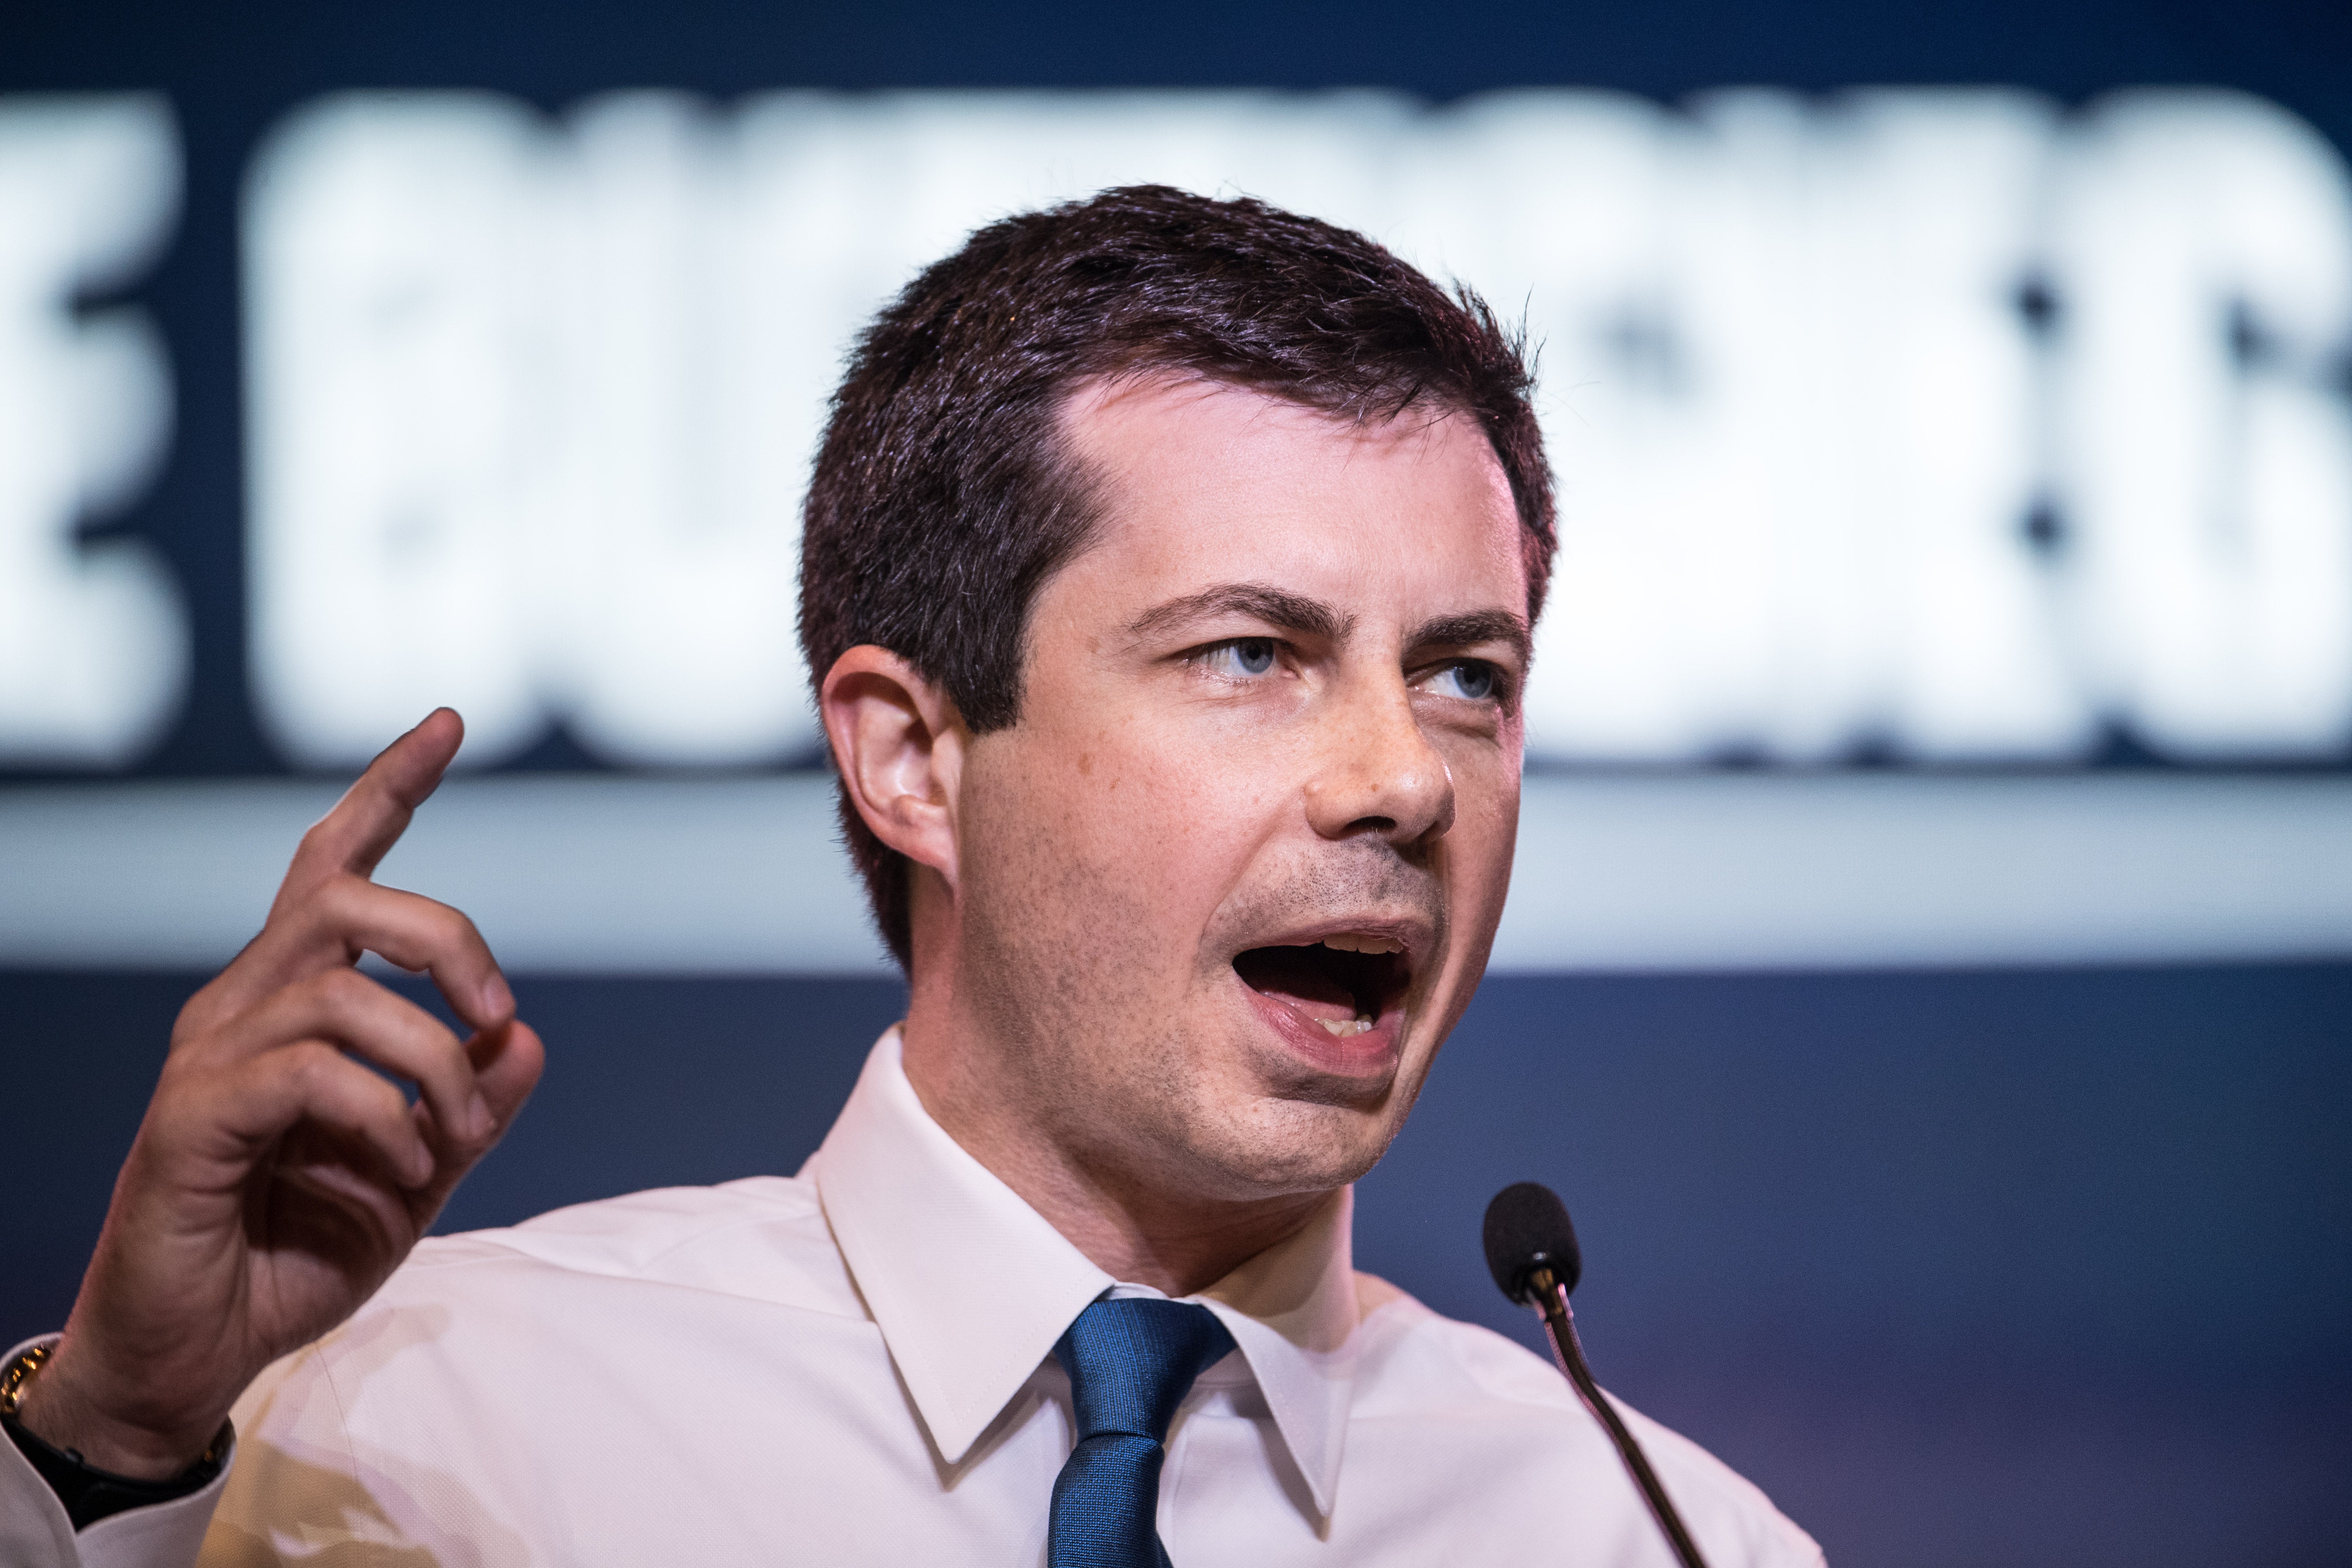 Pete Buttigieg Faces Tensions At Town Hall Following Police Shooting Death Of Black Man